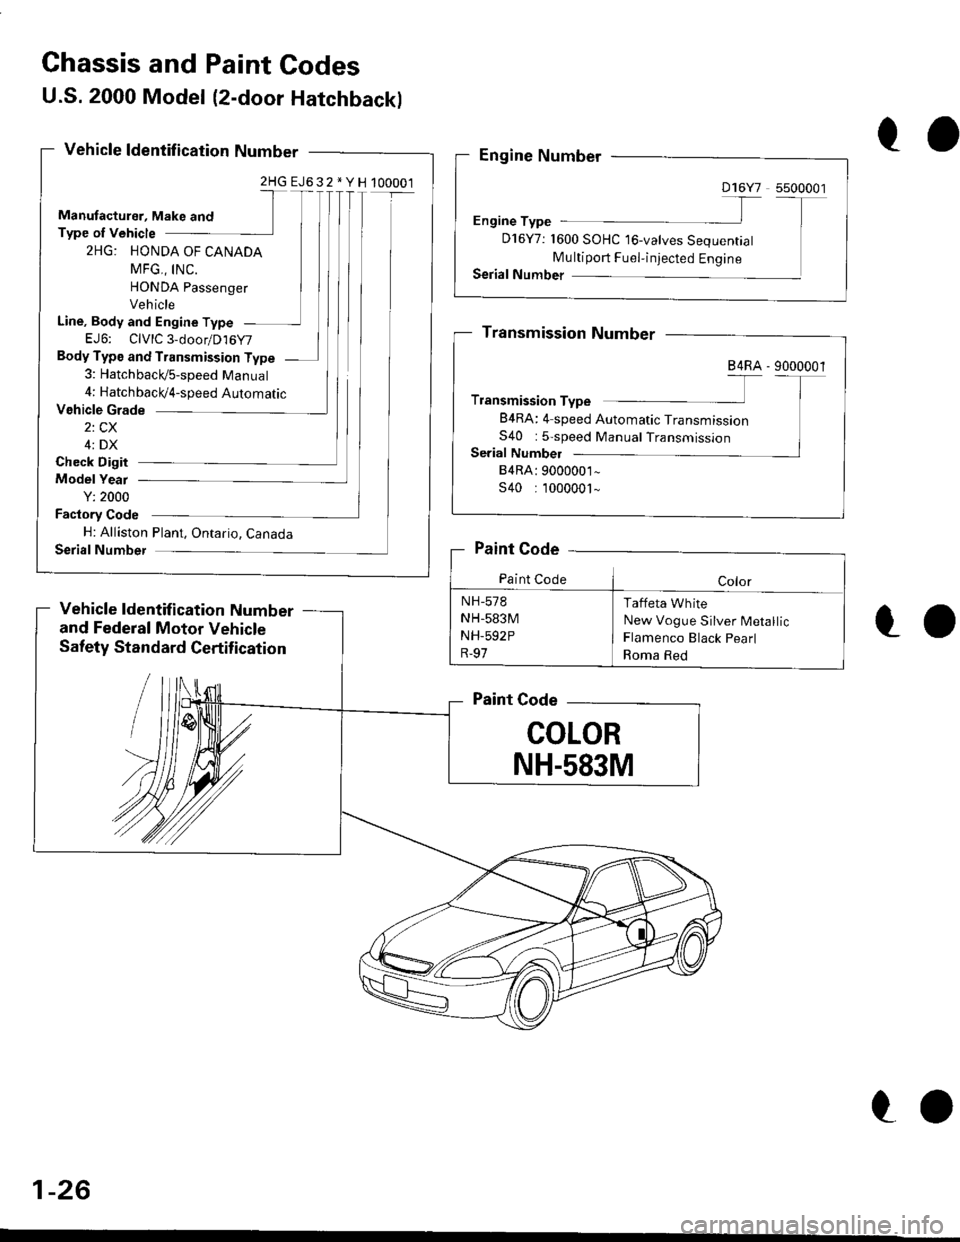 HONDA CIVIC 2000 6.G Owners Manual Chassis and Paint Codes
Vohicle Grade
2: CX
4: DX
Check Digit
Model Yeal
Y: 2000
Fastory Code
H: Alliston Plant, Ontario. Canada
Serial Number
Vehicle ldentification NumbeI
and Federal Motor Vehicle
S